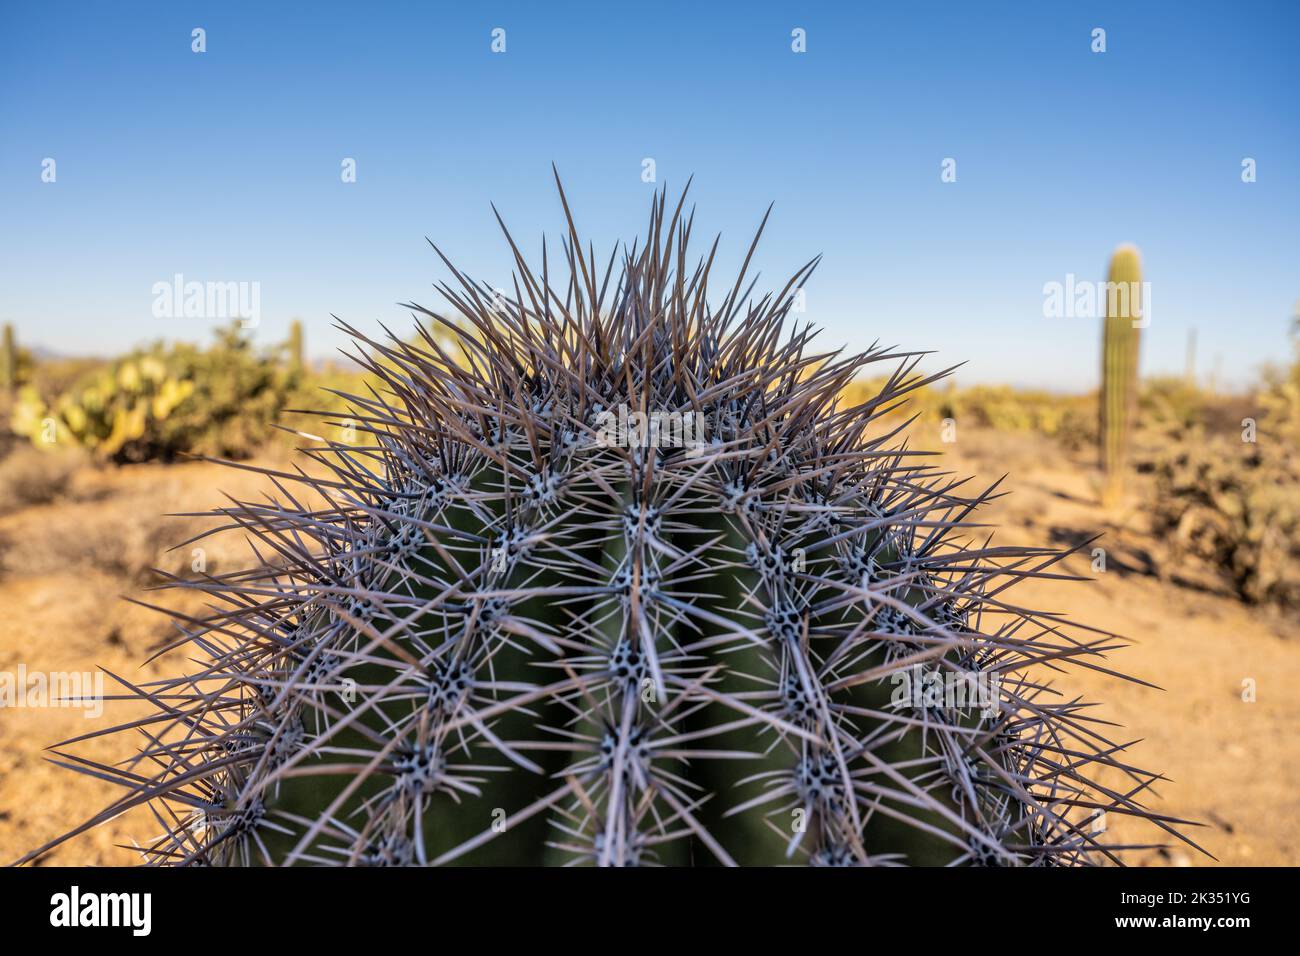 Long Needles On The Top of Cactus in Saguaro National Park Stock Photo